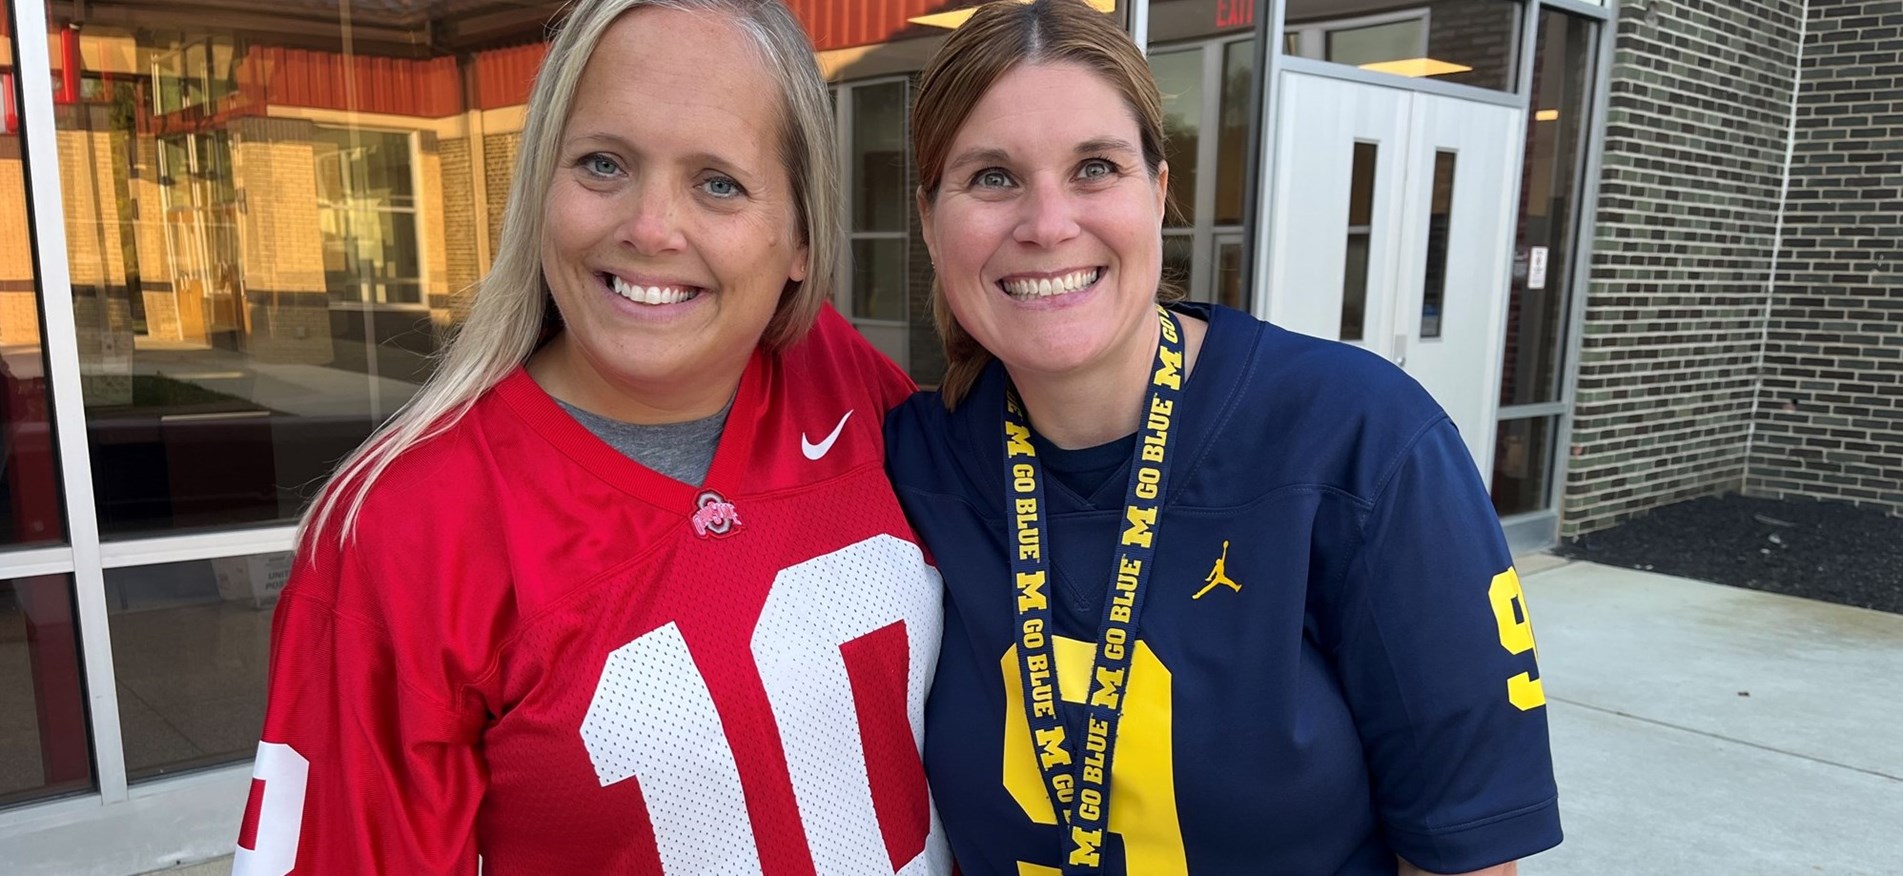 Two staff members were OSU and Michigan gear for sports dress theme day